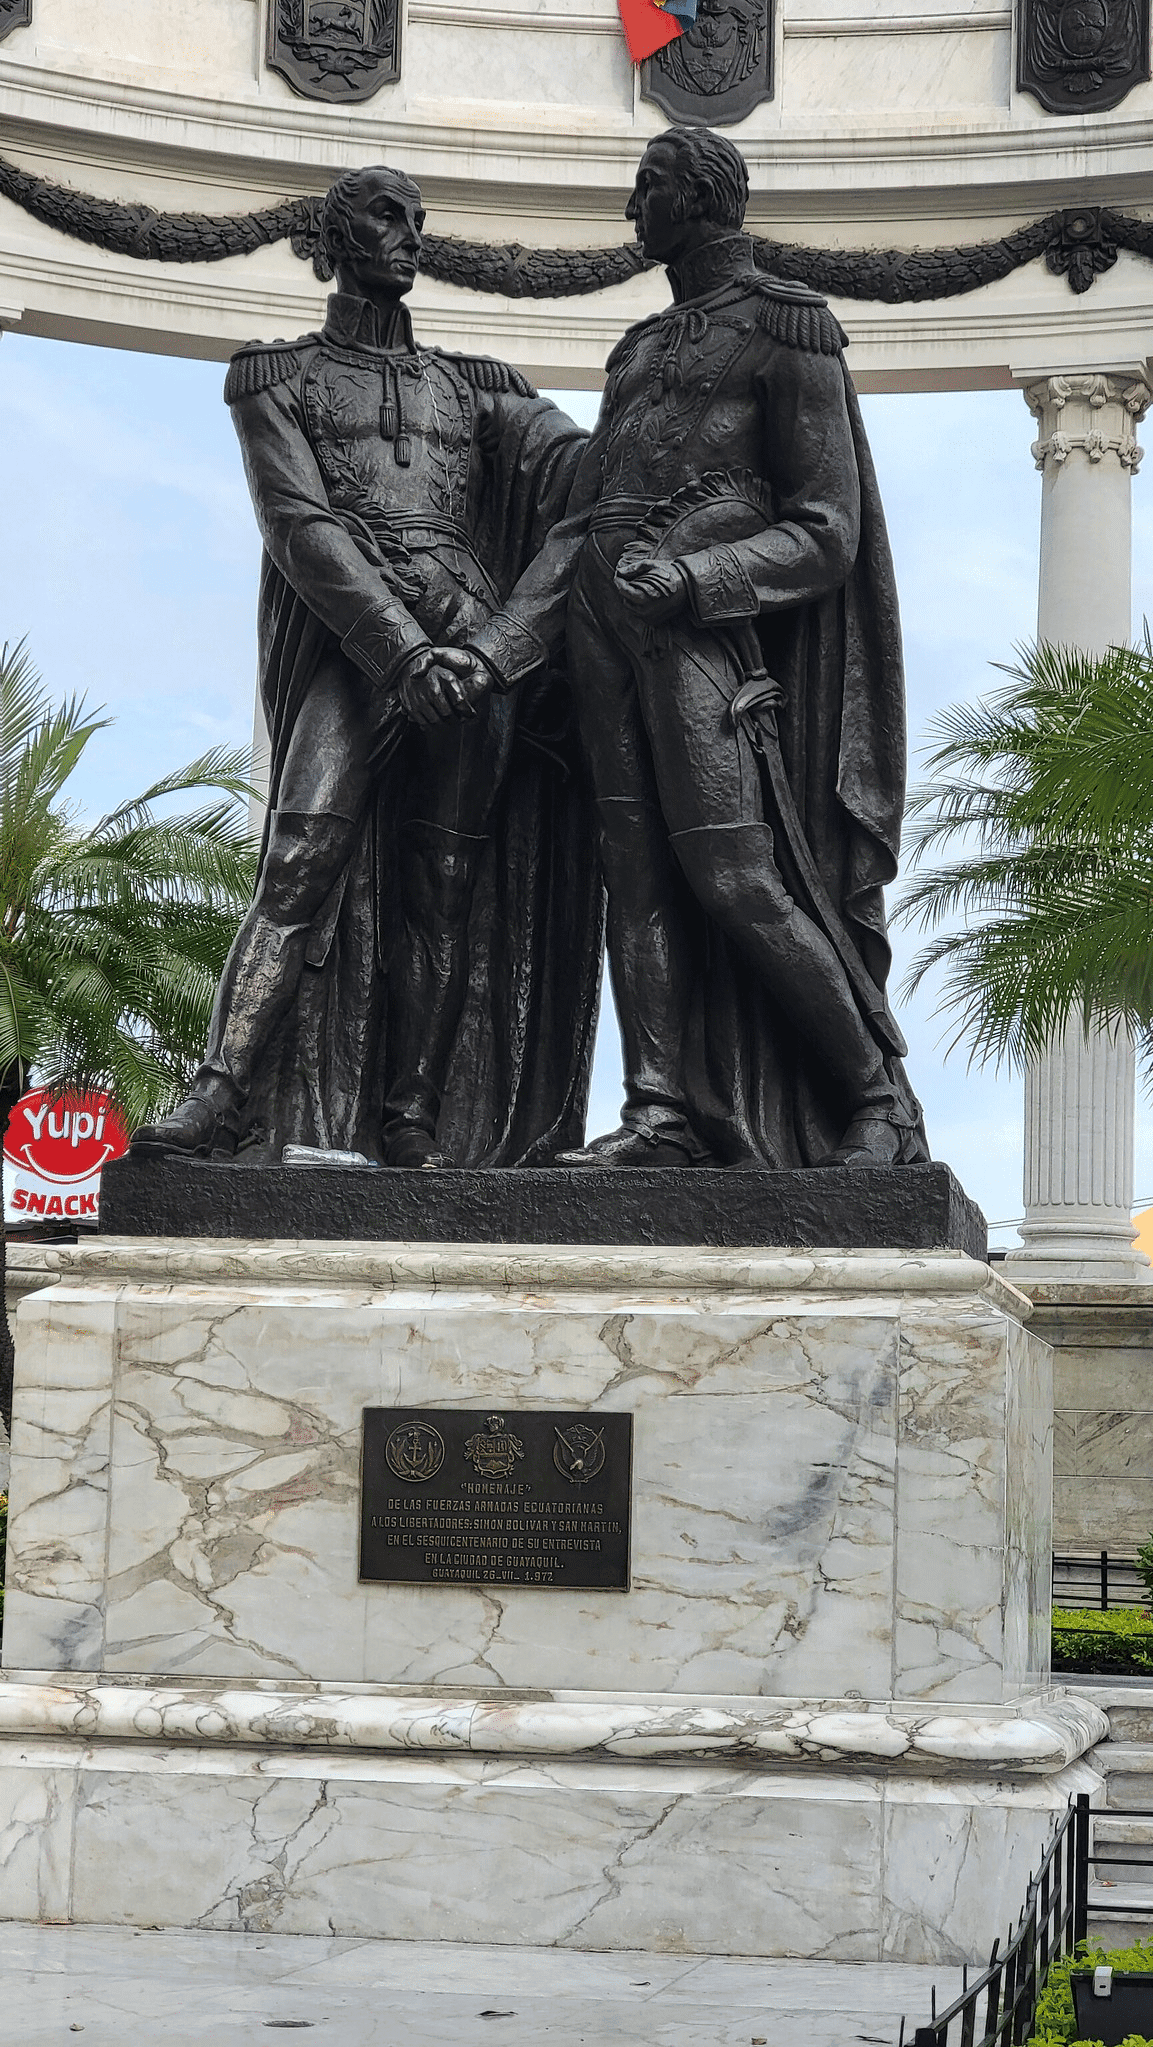 Statue of Simon Bolivar and José de San Martin, leaders of the Independence movement.